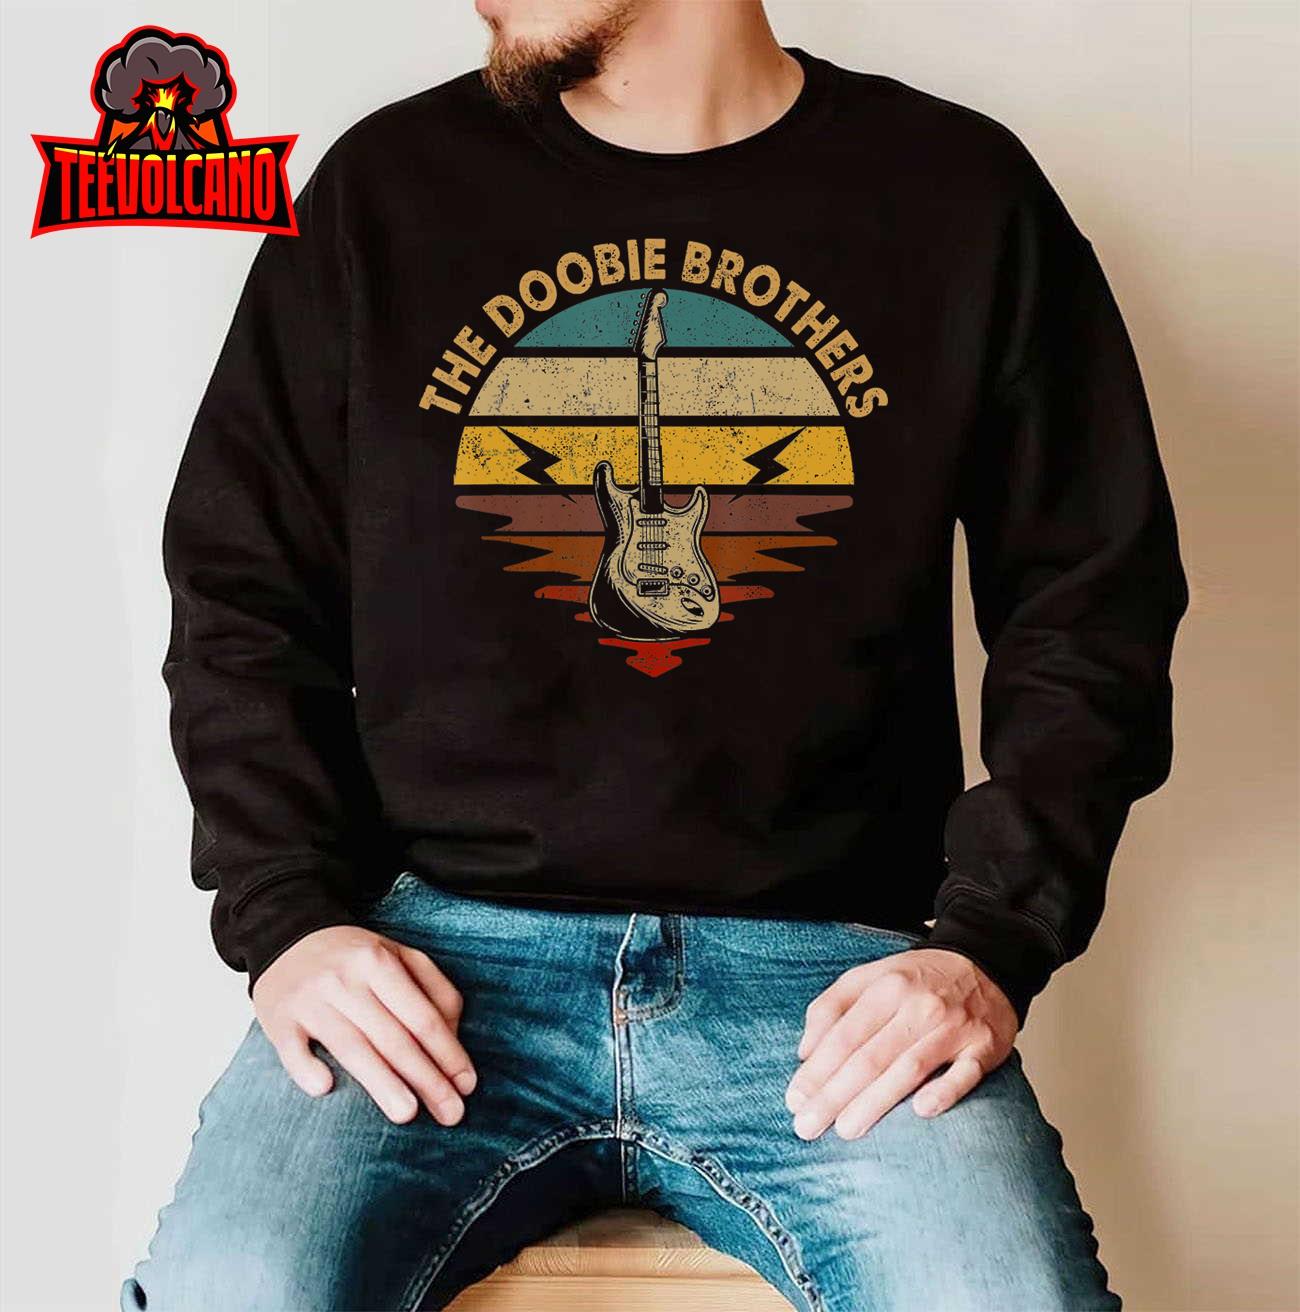 Vintage Guitar Beautiful Name Doobie Brothers Personalized T-Shirt